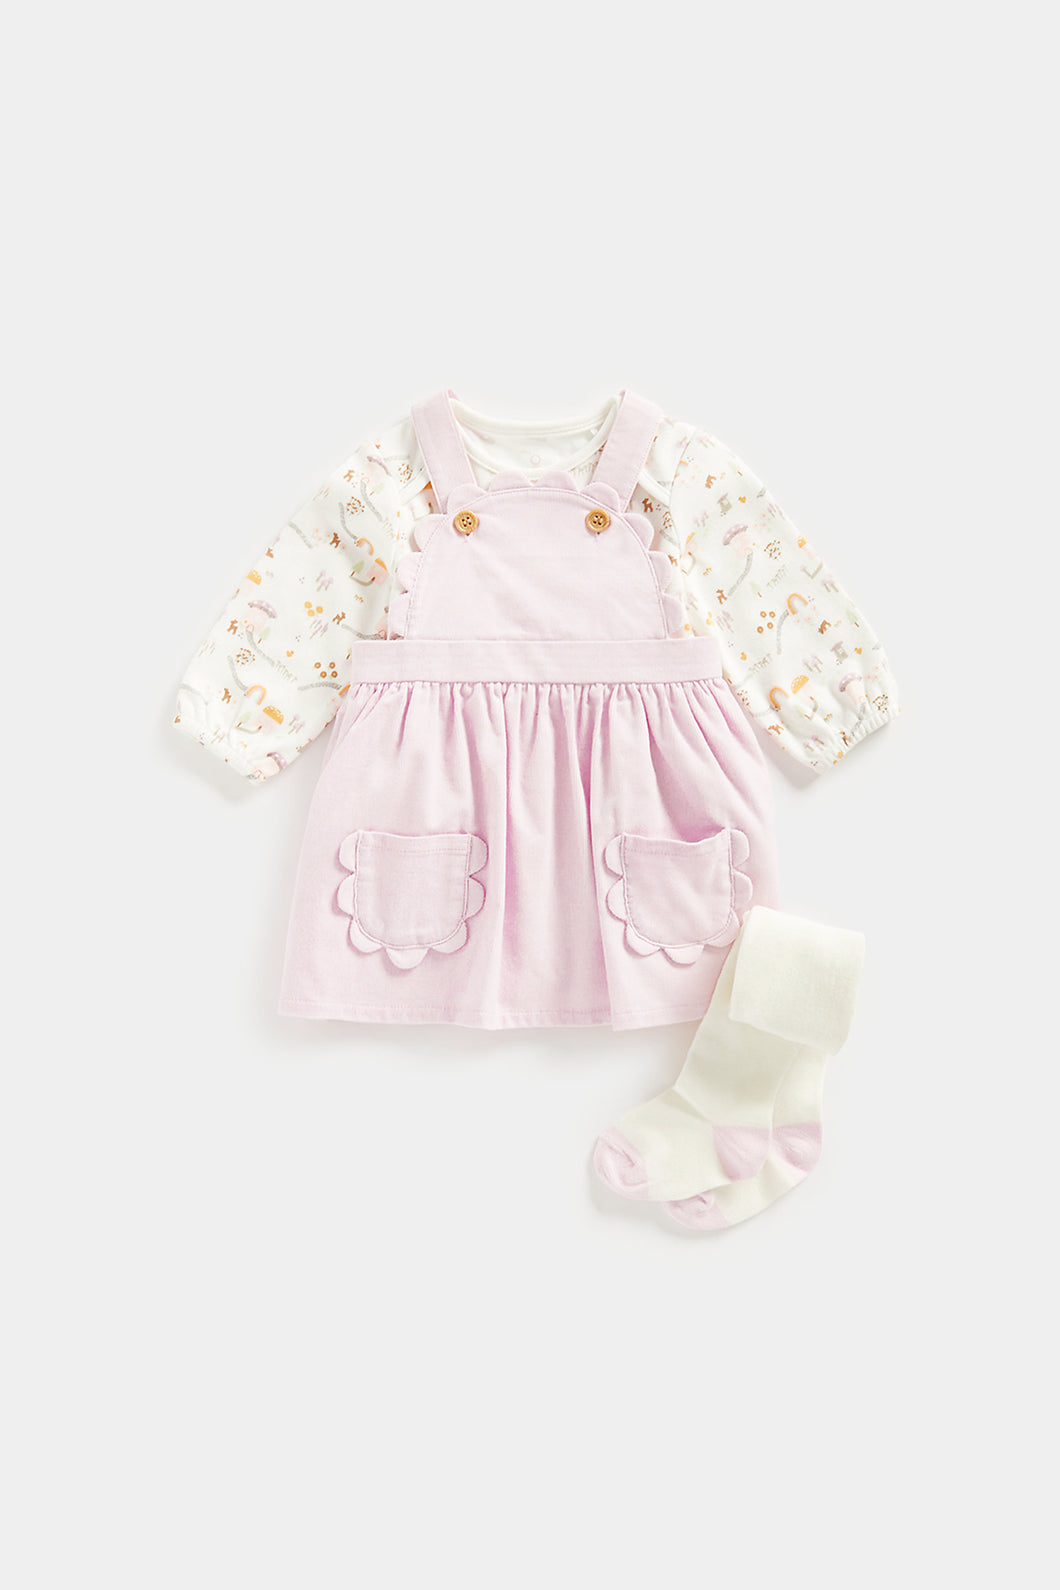 Mothercare Cord Pinny Dress, Bodysuit and Tights Set